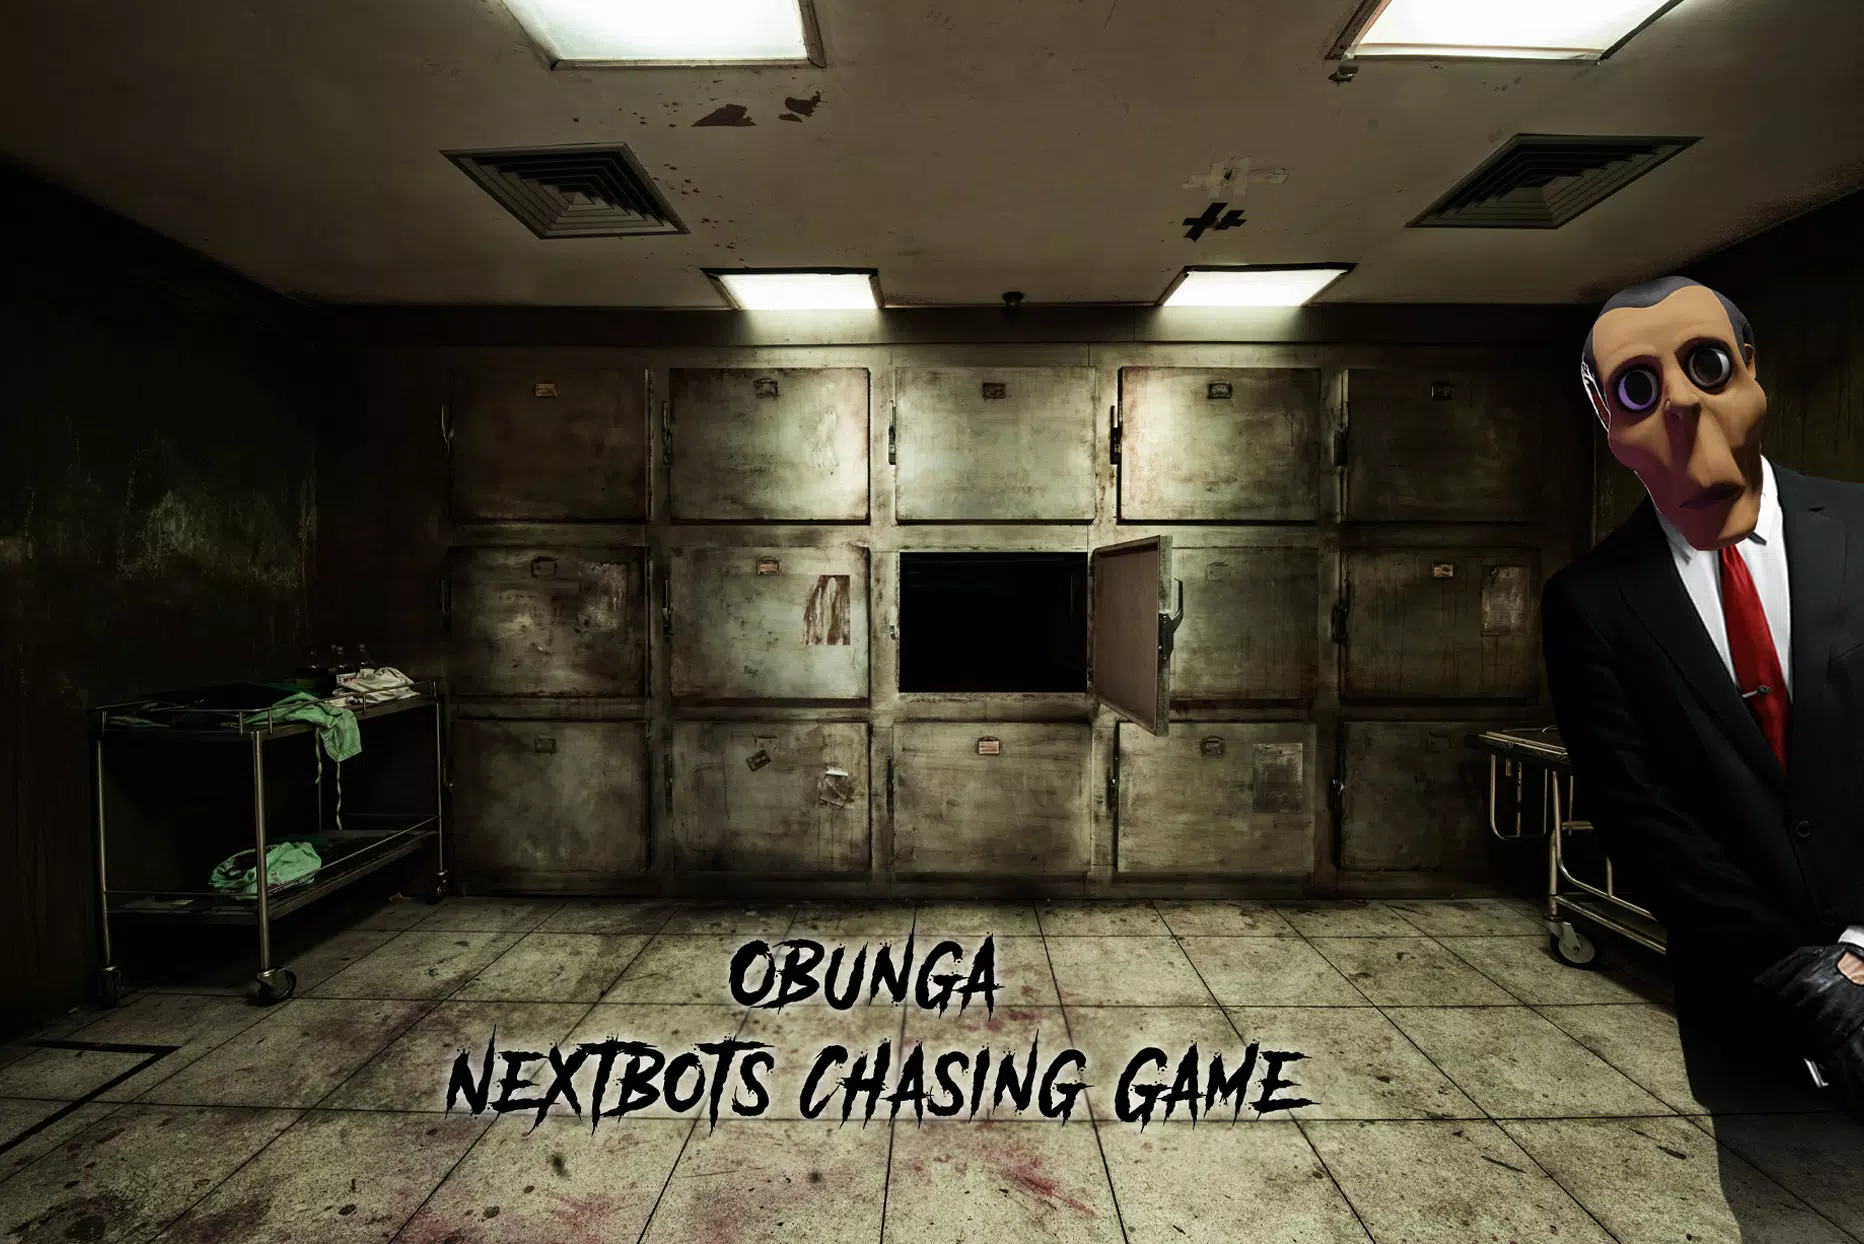 Nextbots In Backrooms: Obunga - Apps on Google Play